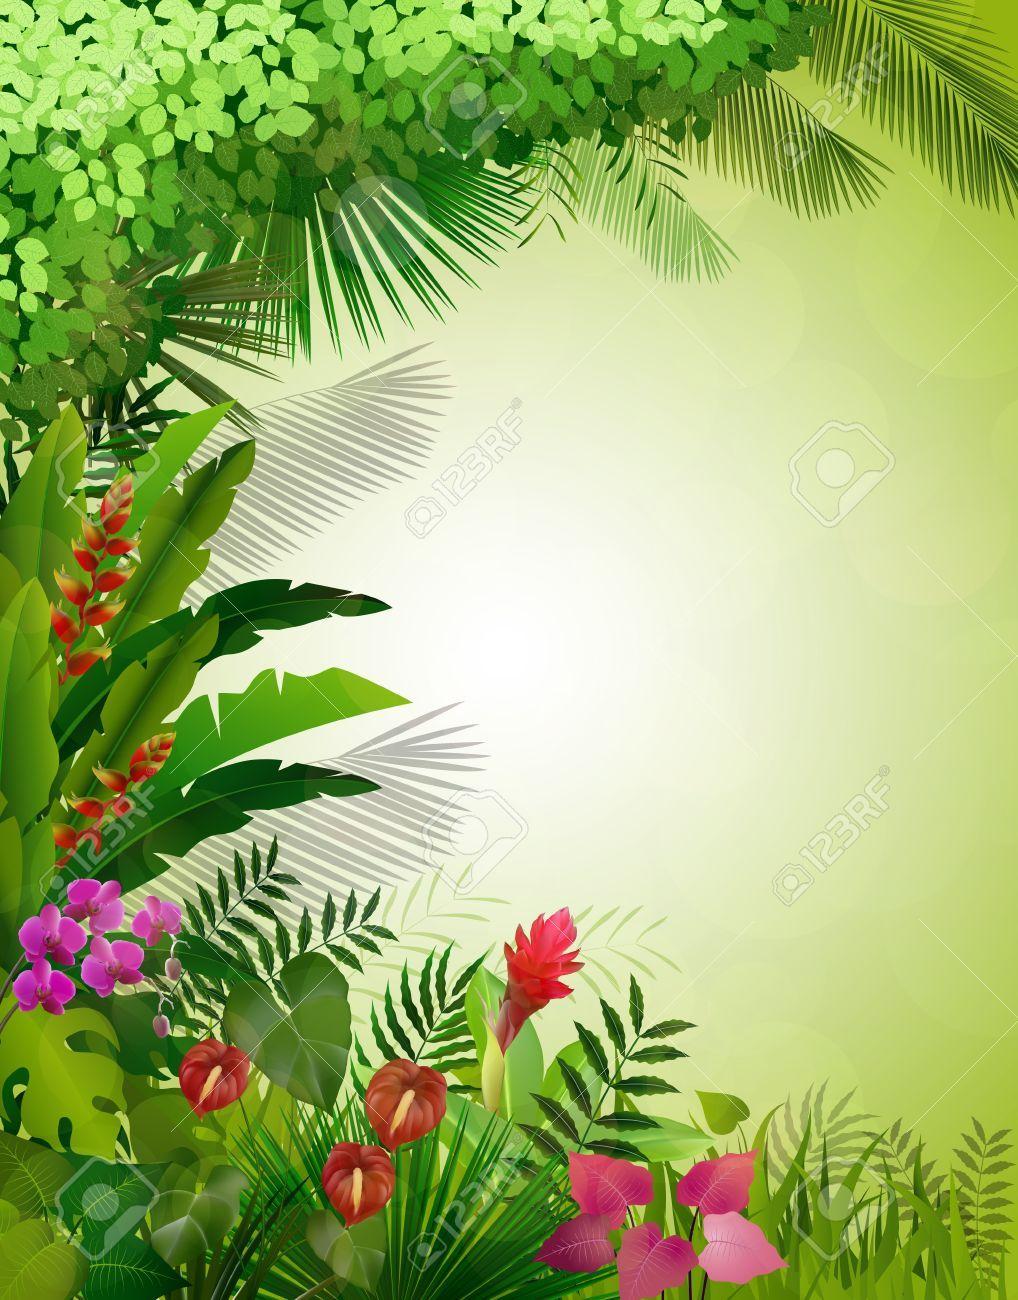 Gallery of Tropical Background: 1018x1300 px, Kristi Neese